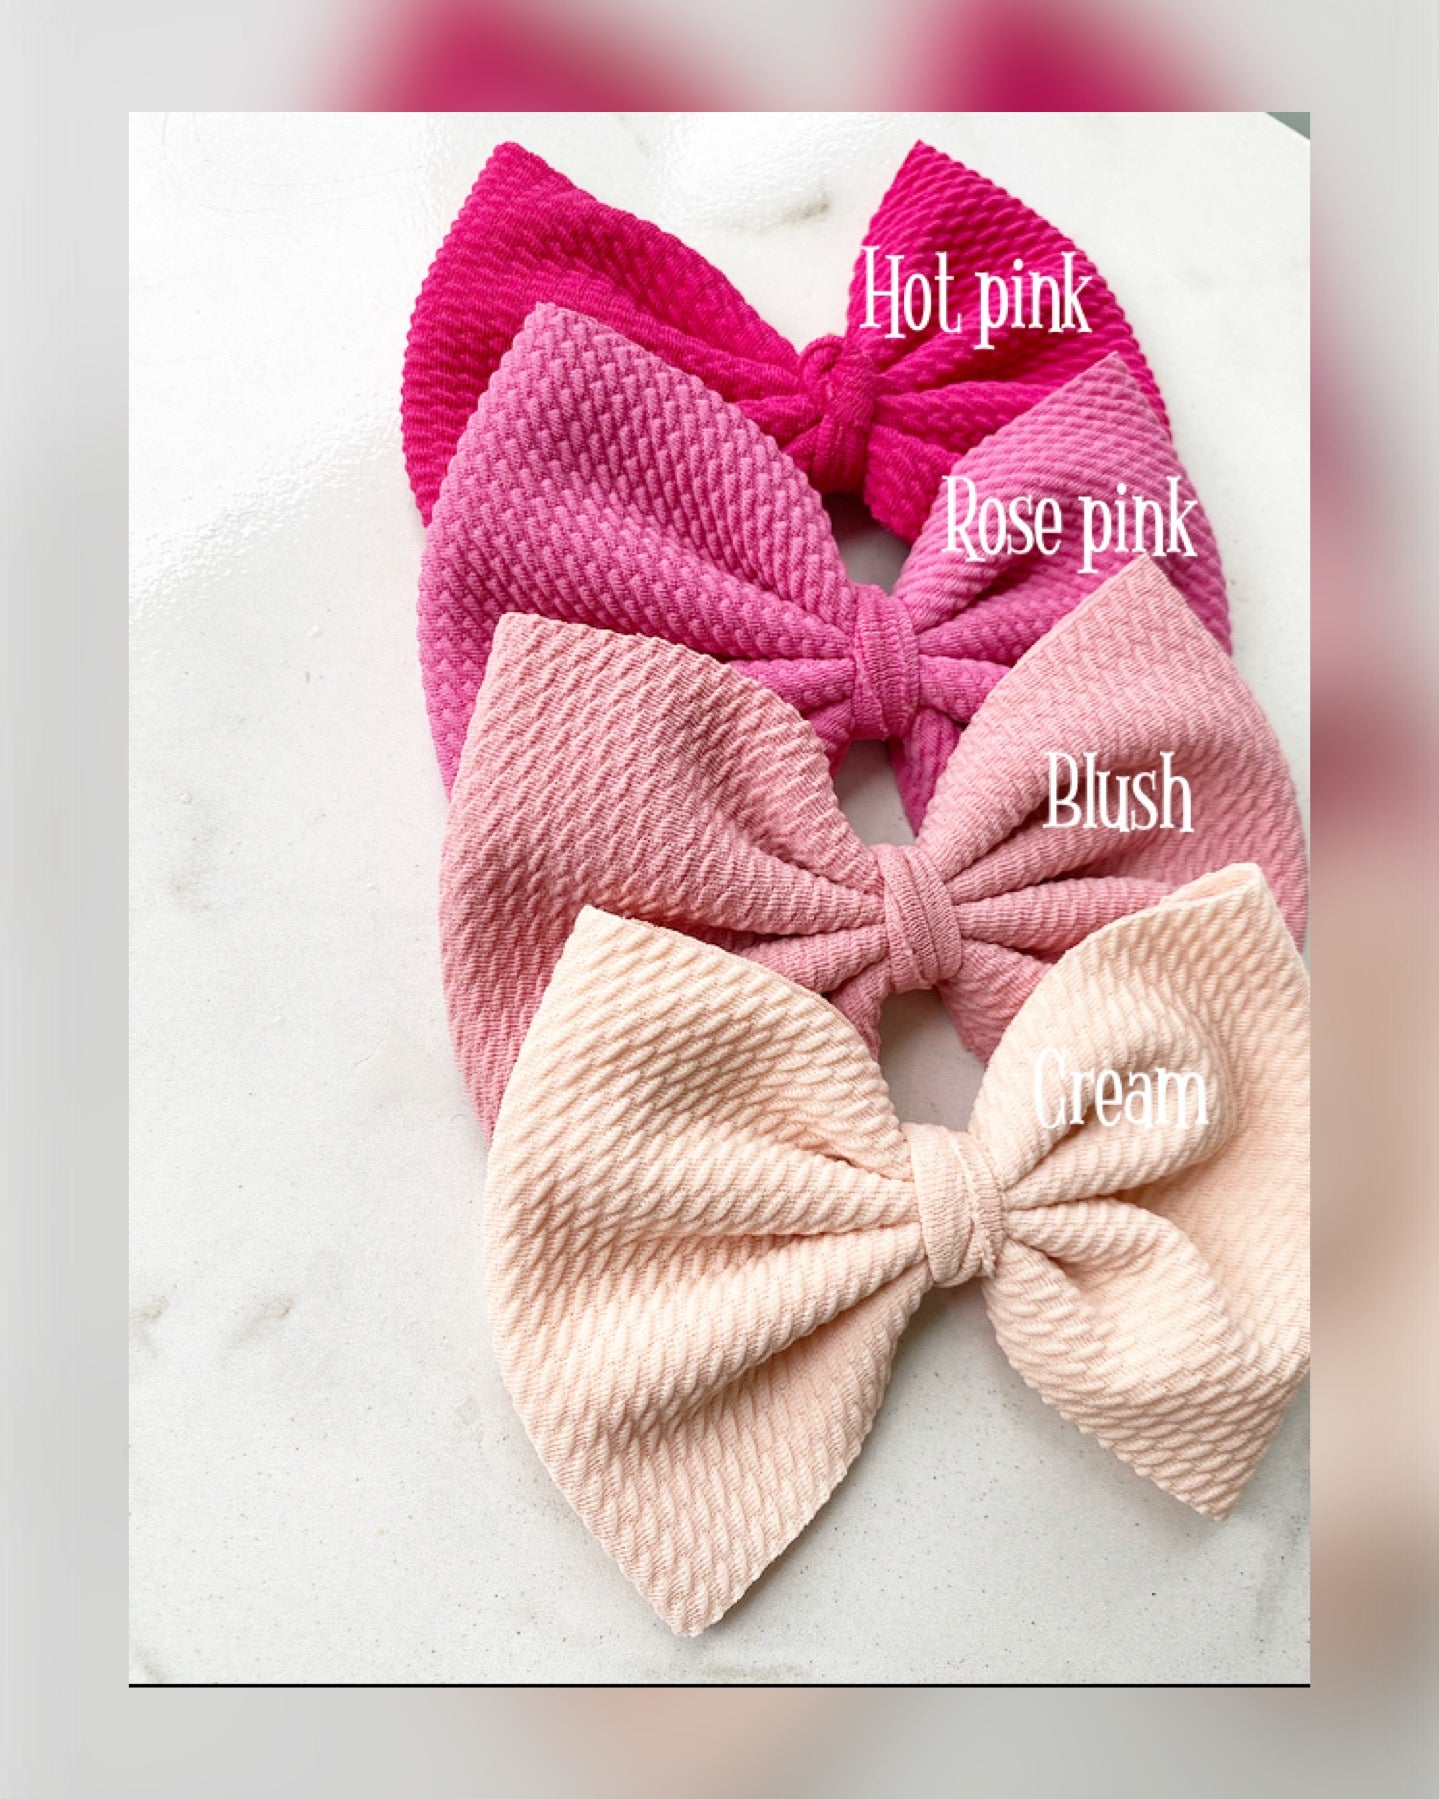 Pink shades of oversized bows